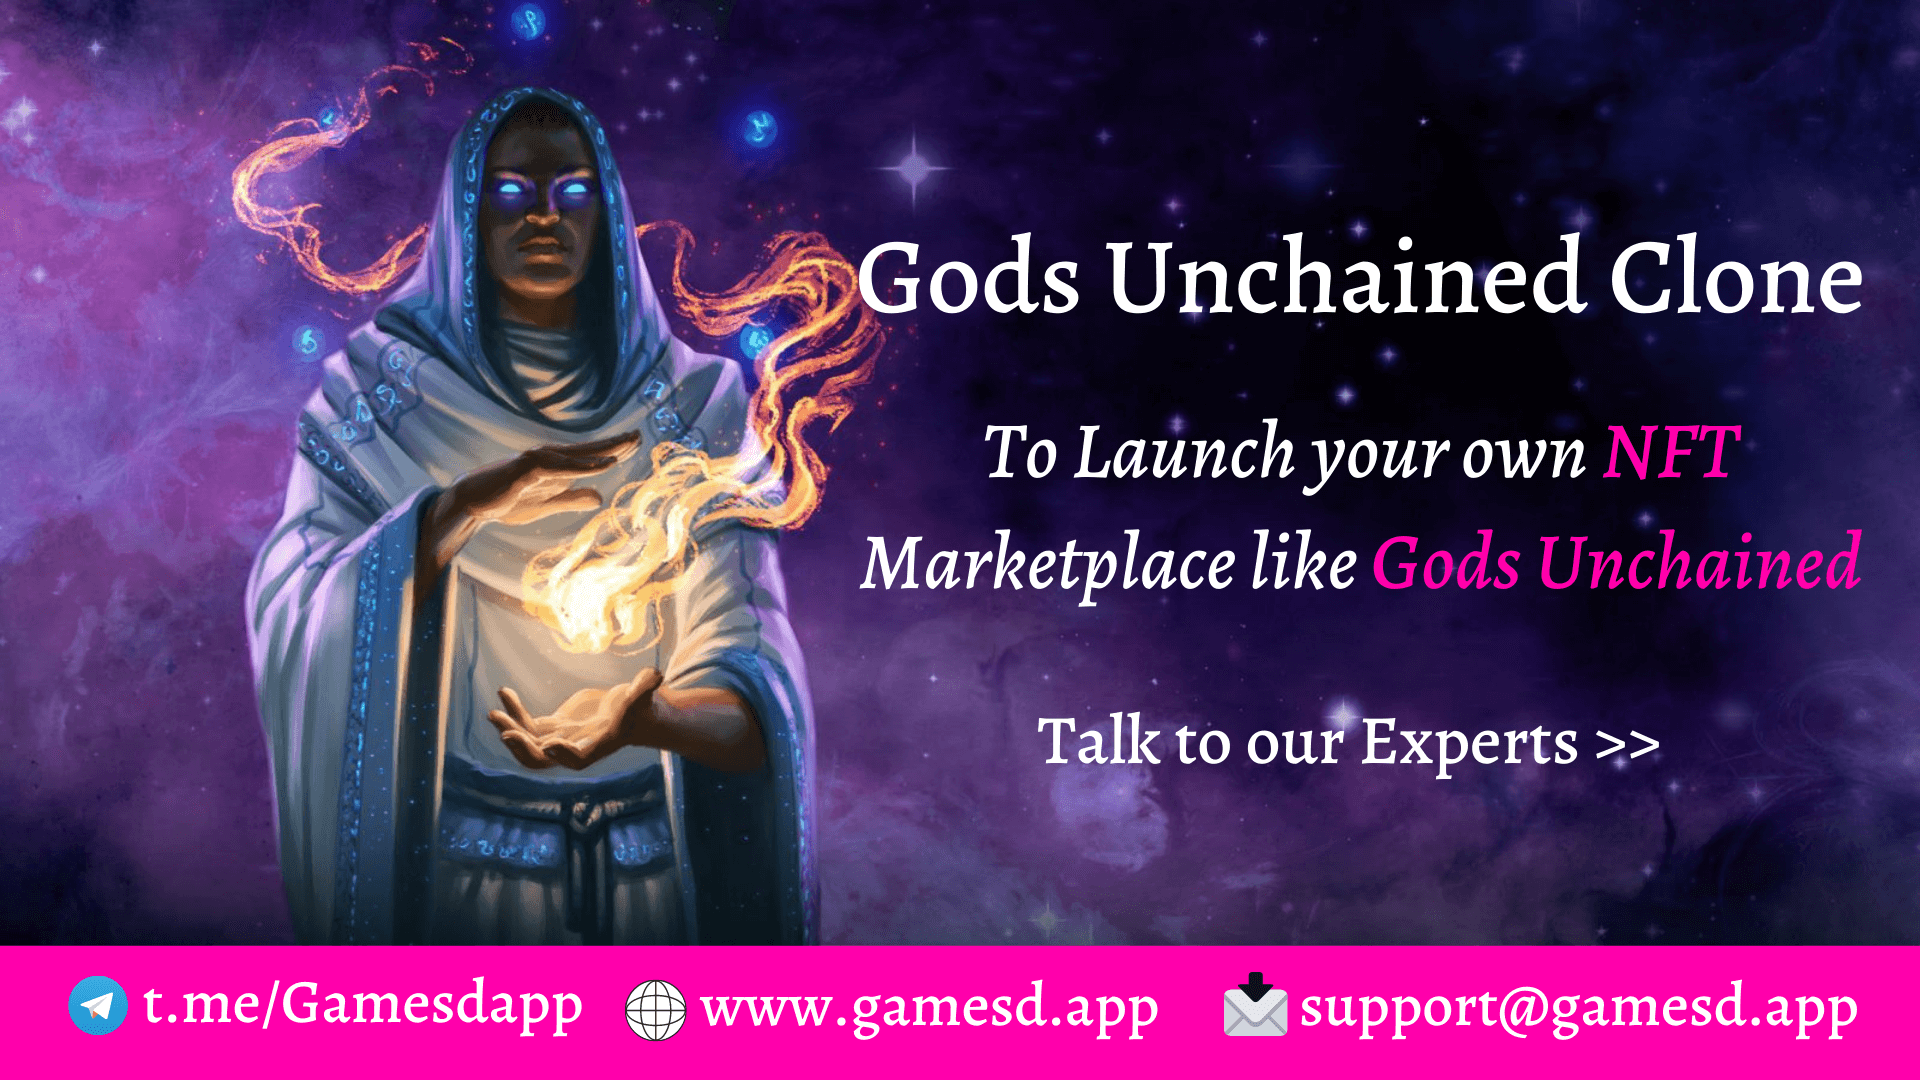 Gods Unchained Clone - Build NFT based Trading Card Game like Gods Unchained